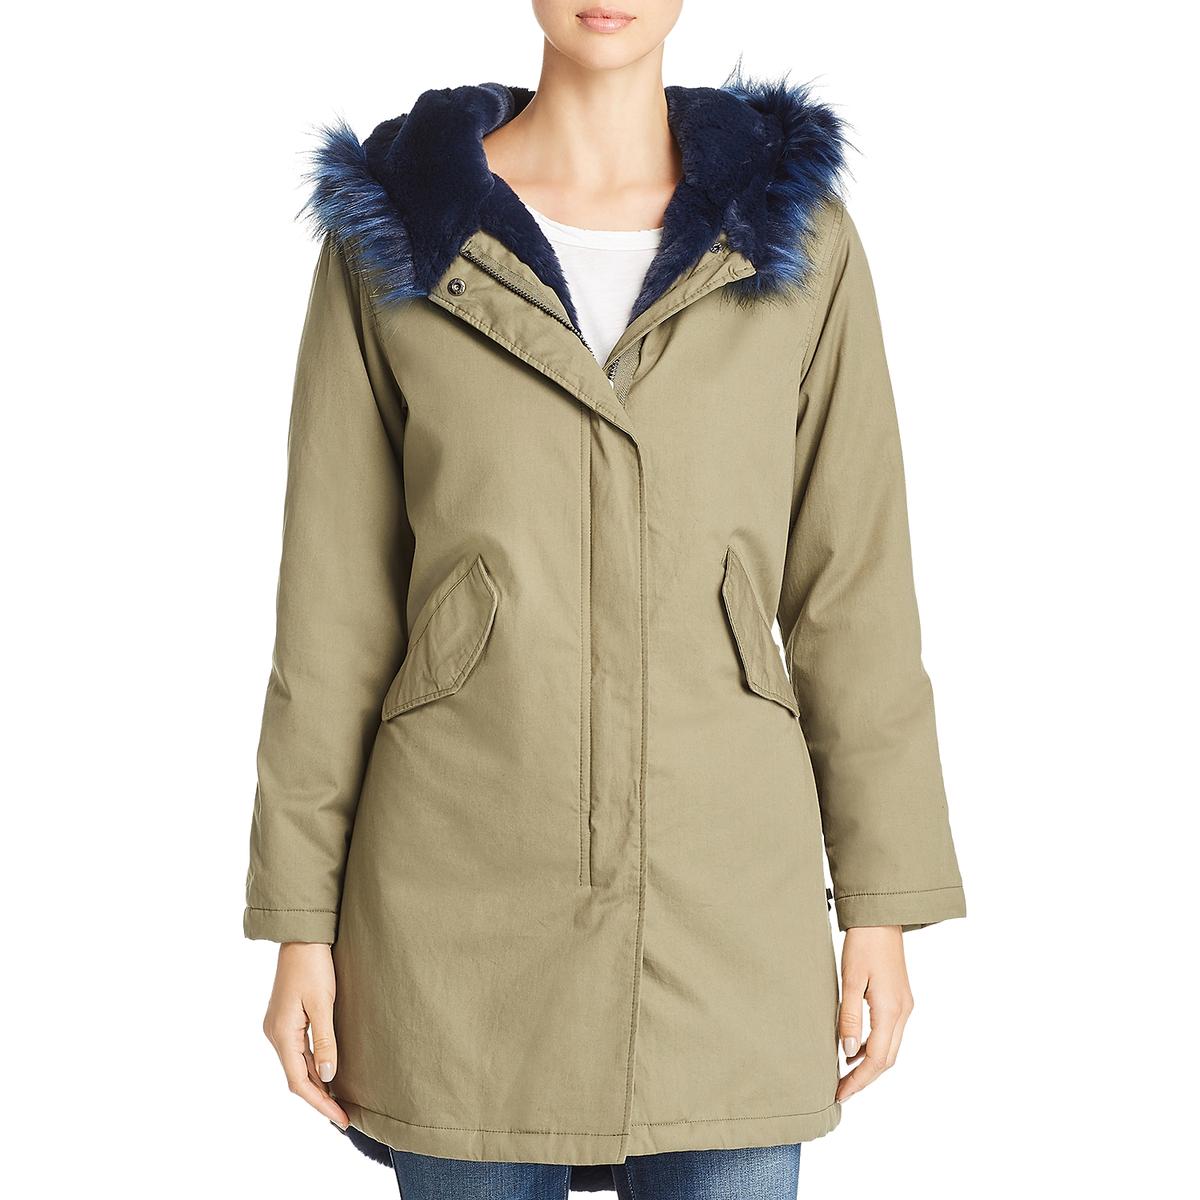 Kenneth Cole Womens Green Hooded Parka Outerwear Anorak Jacket Coat M ...